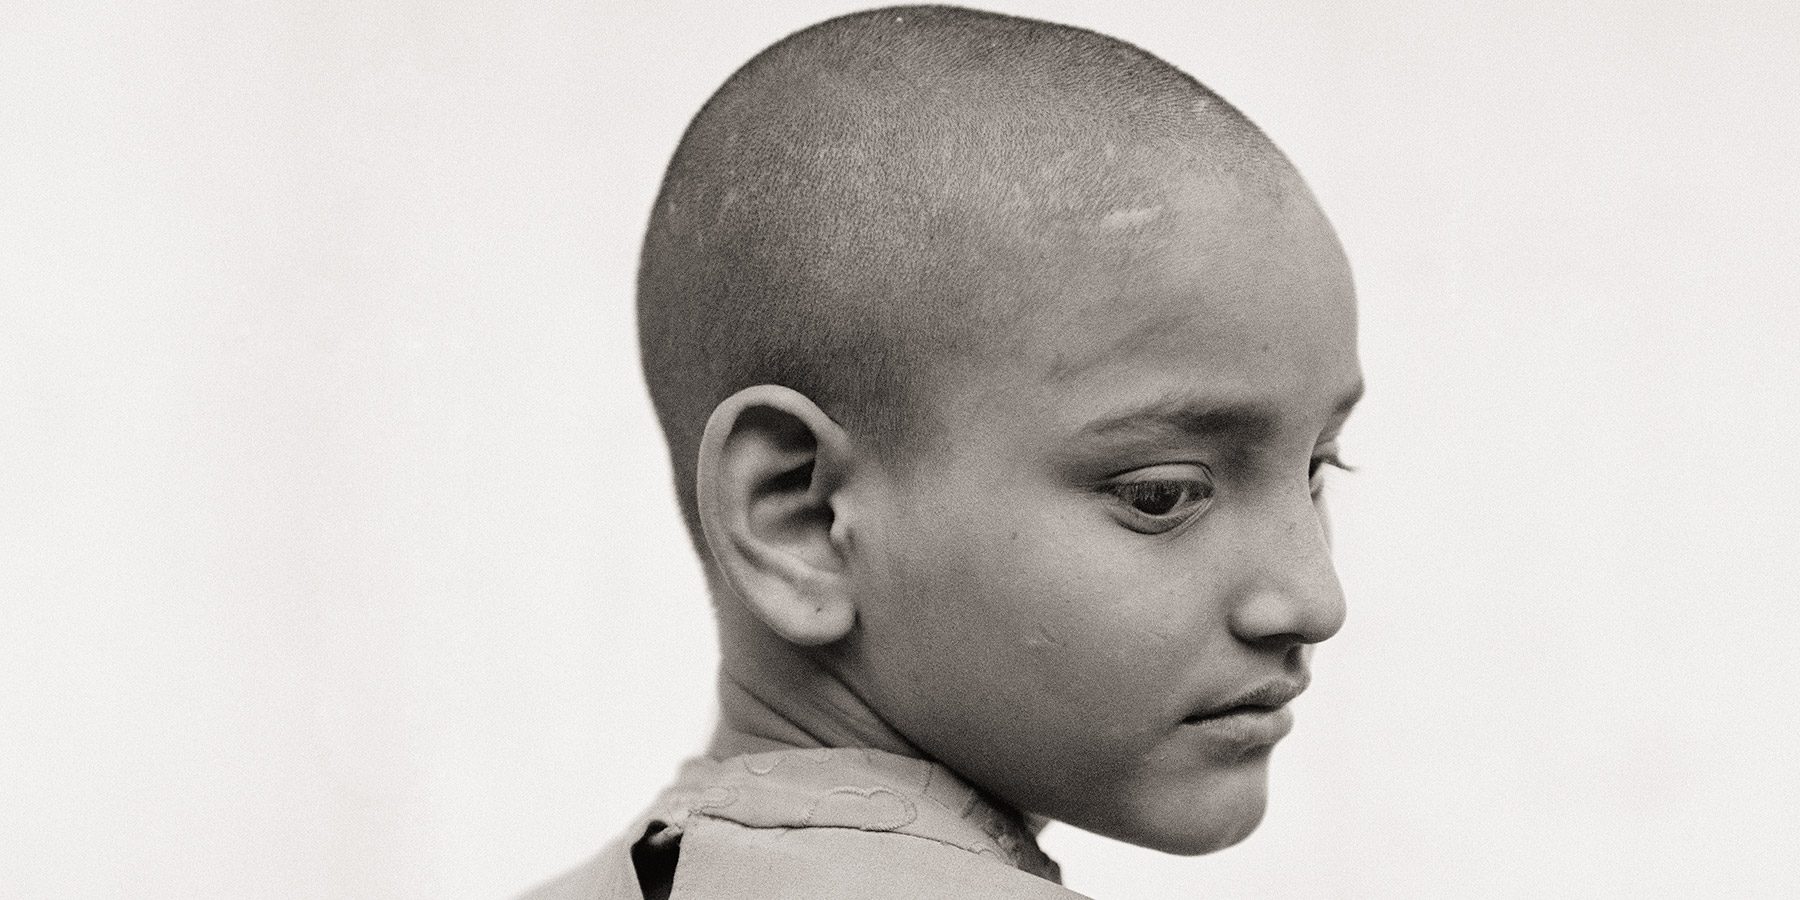 Black and white image of a young child with a shaved head, back to the viewer, and head turned around looking over her right shoulder and downward at the viewer